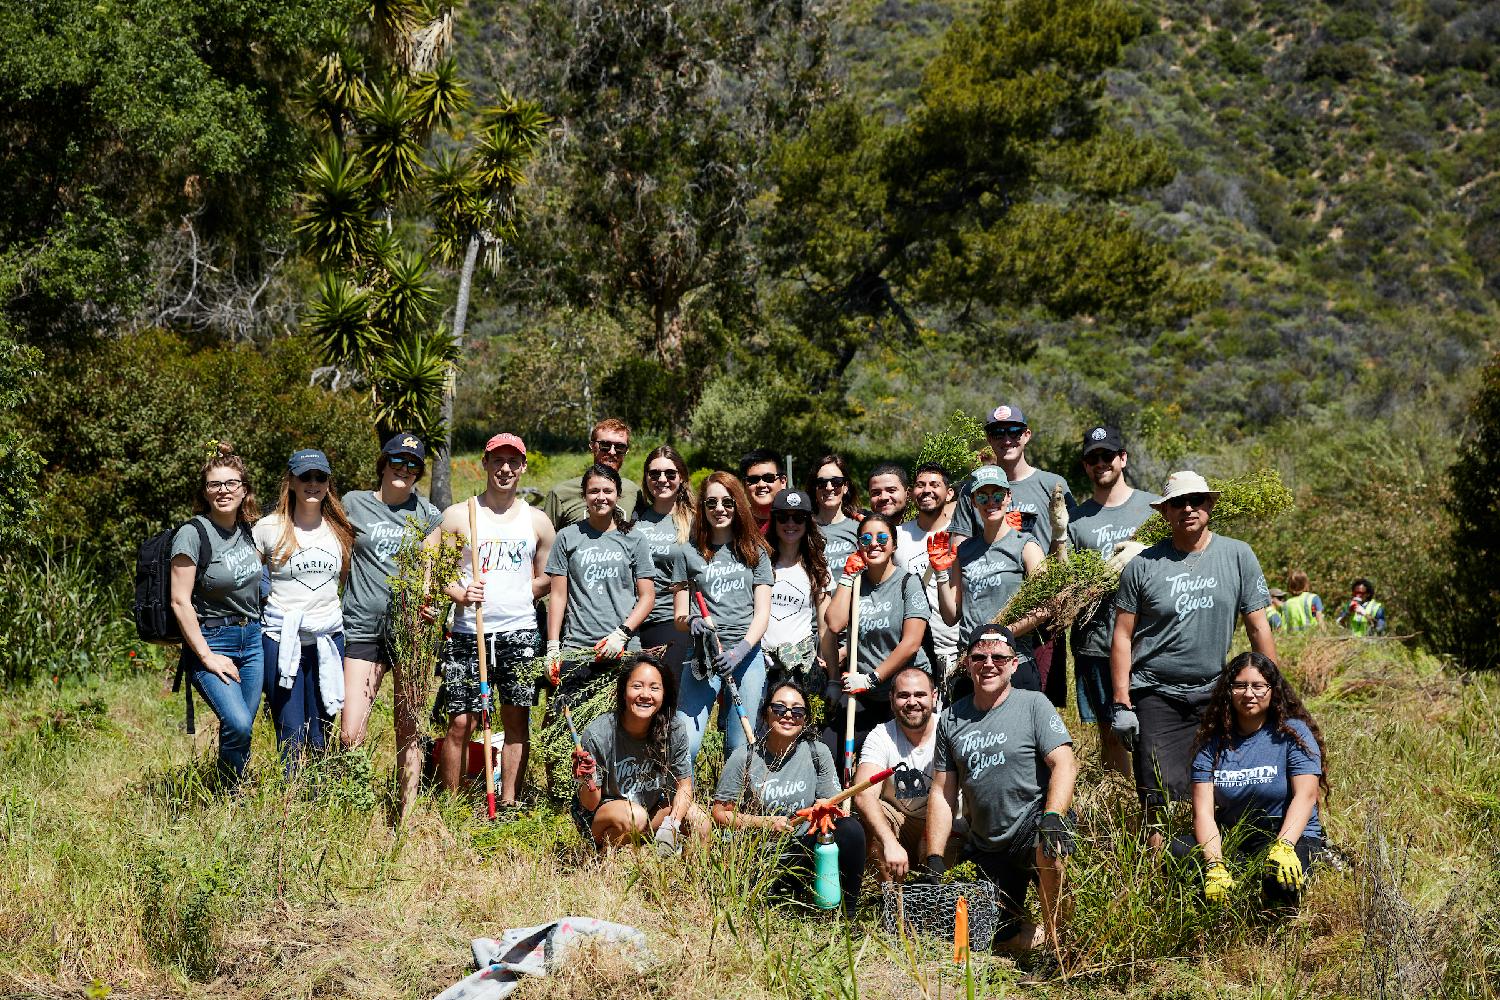 An awesome turnout for our volunteer event with One Tree Planted at Topanga State Park!